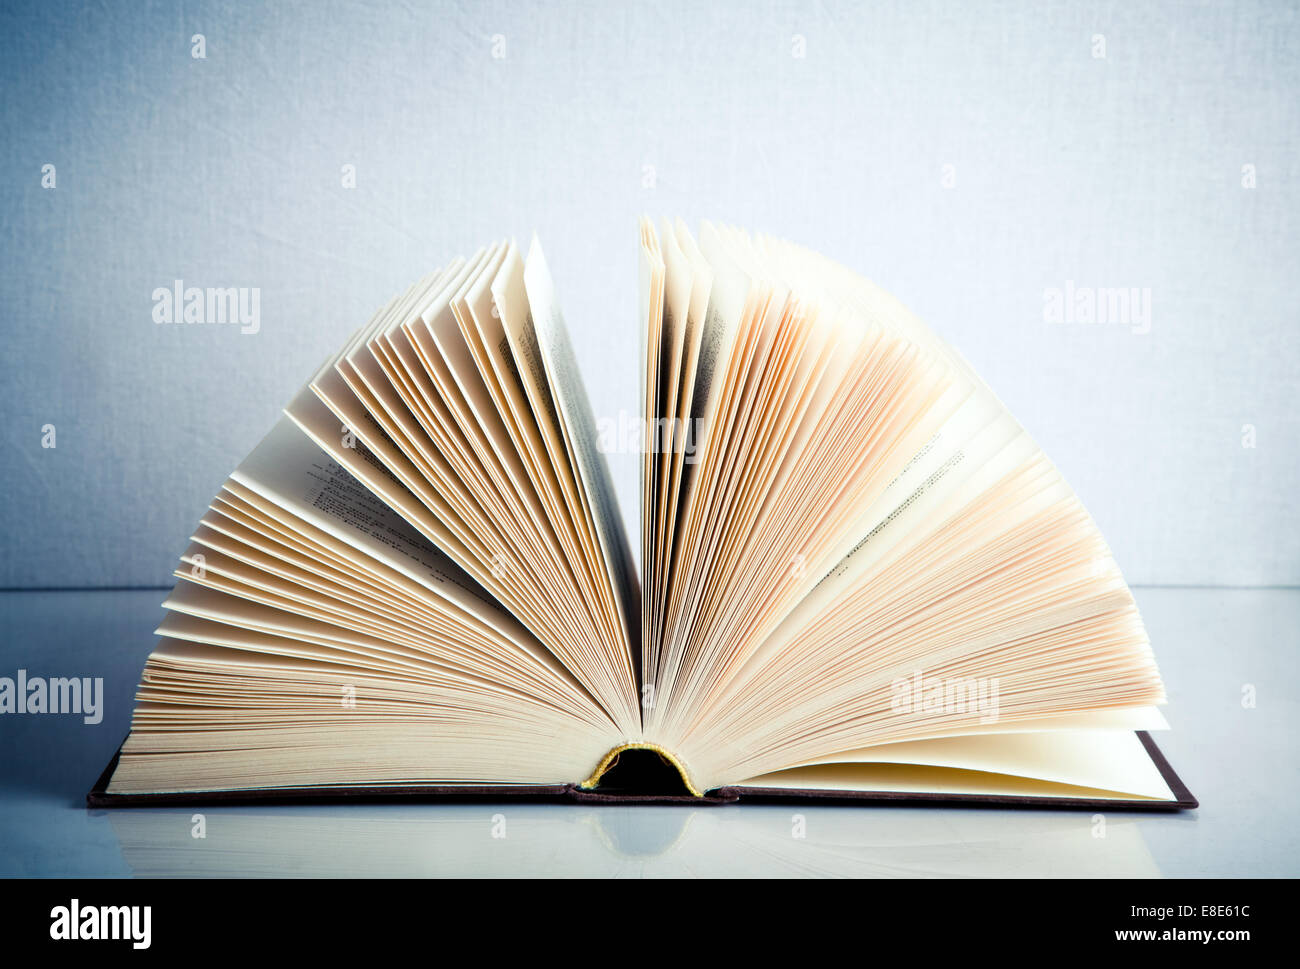 Fanned book on a white reflective surface Stock Photo